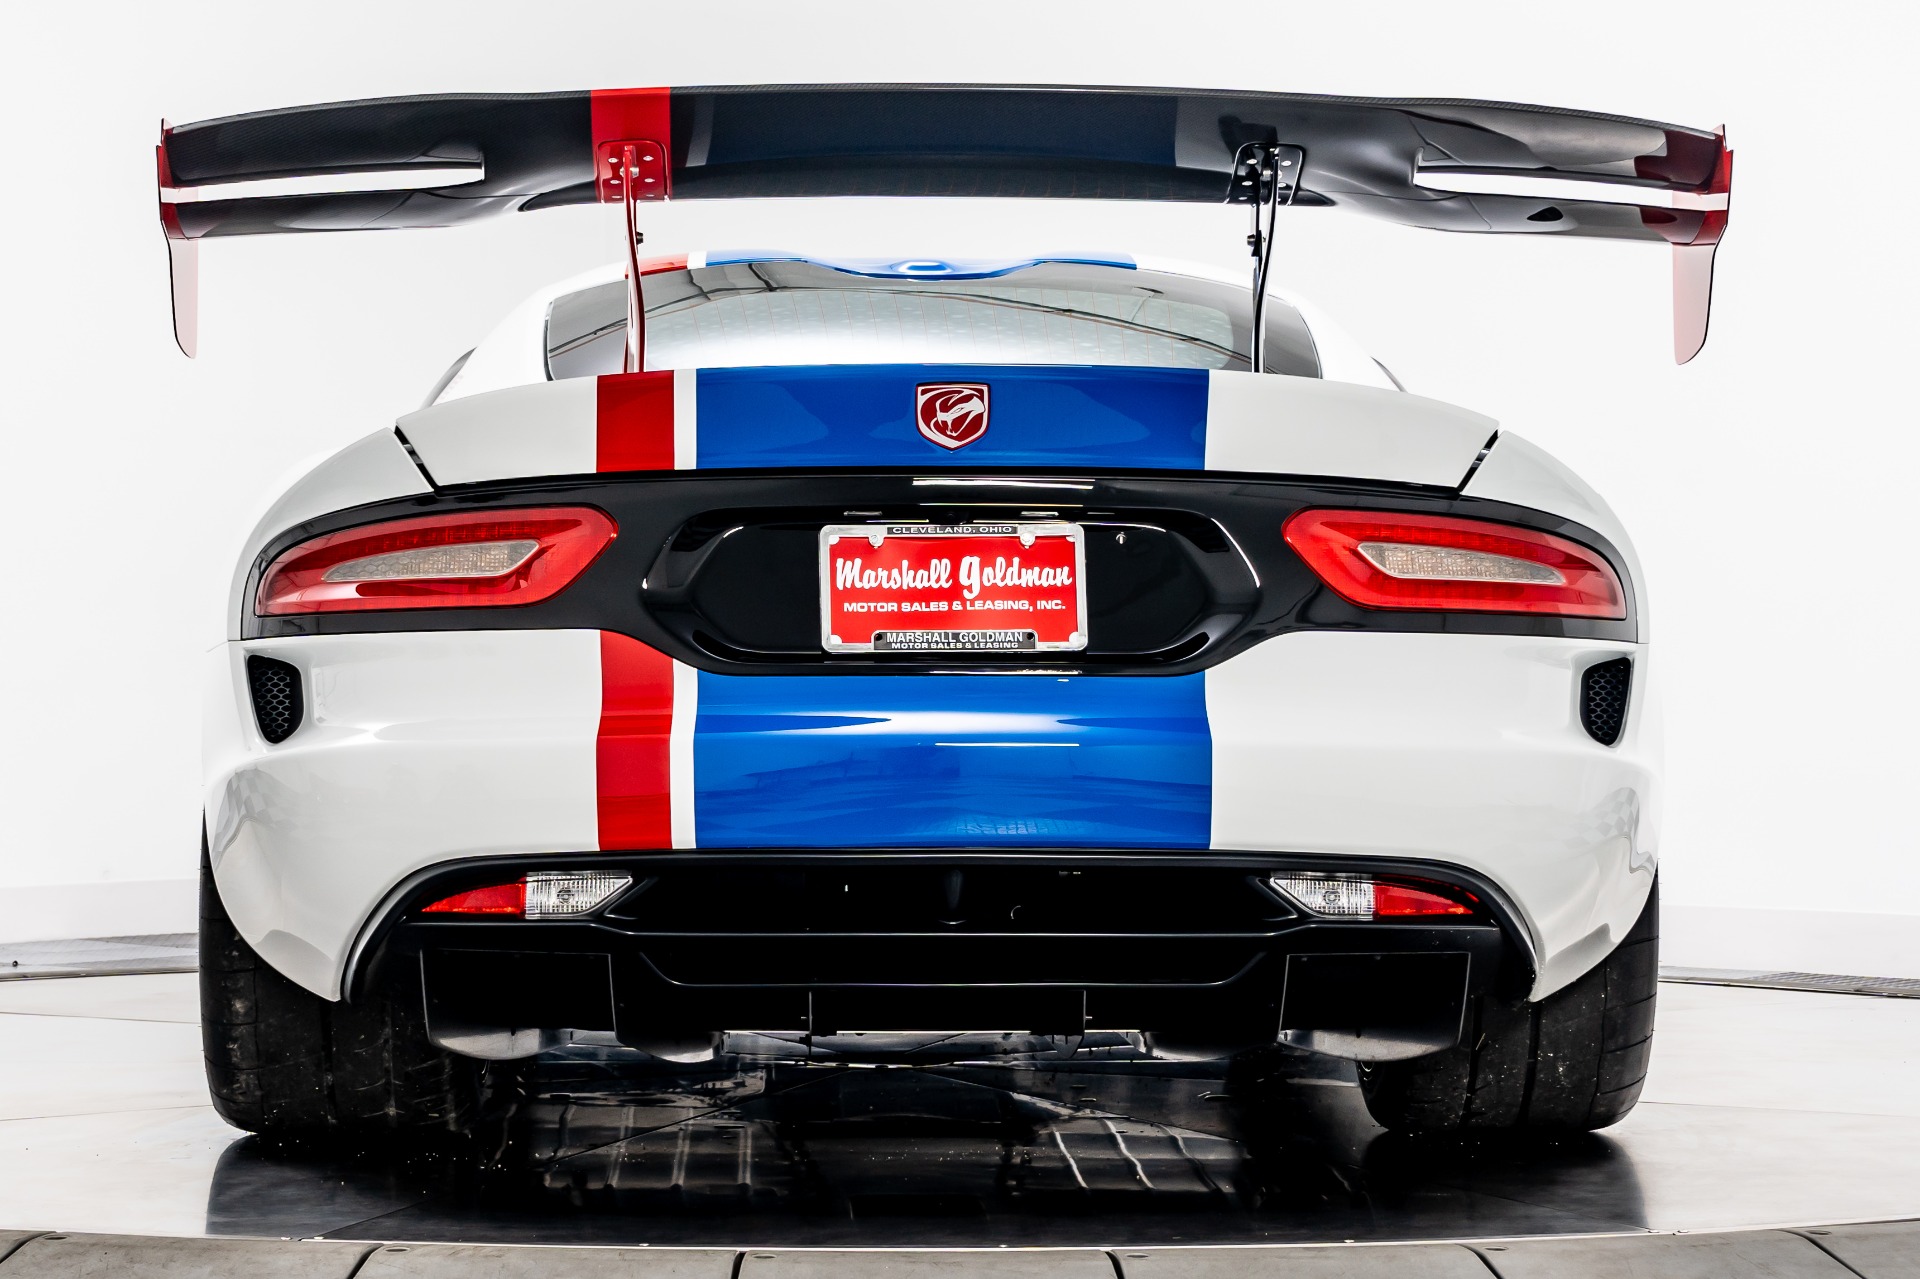 Used 17 Dodge Viper Acr Extreme Aero For Sale Sold Marshall Goldman Cleveland Stock W